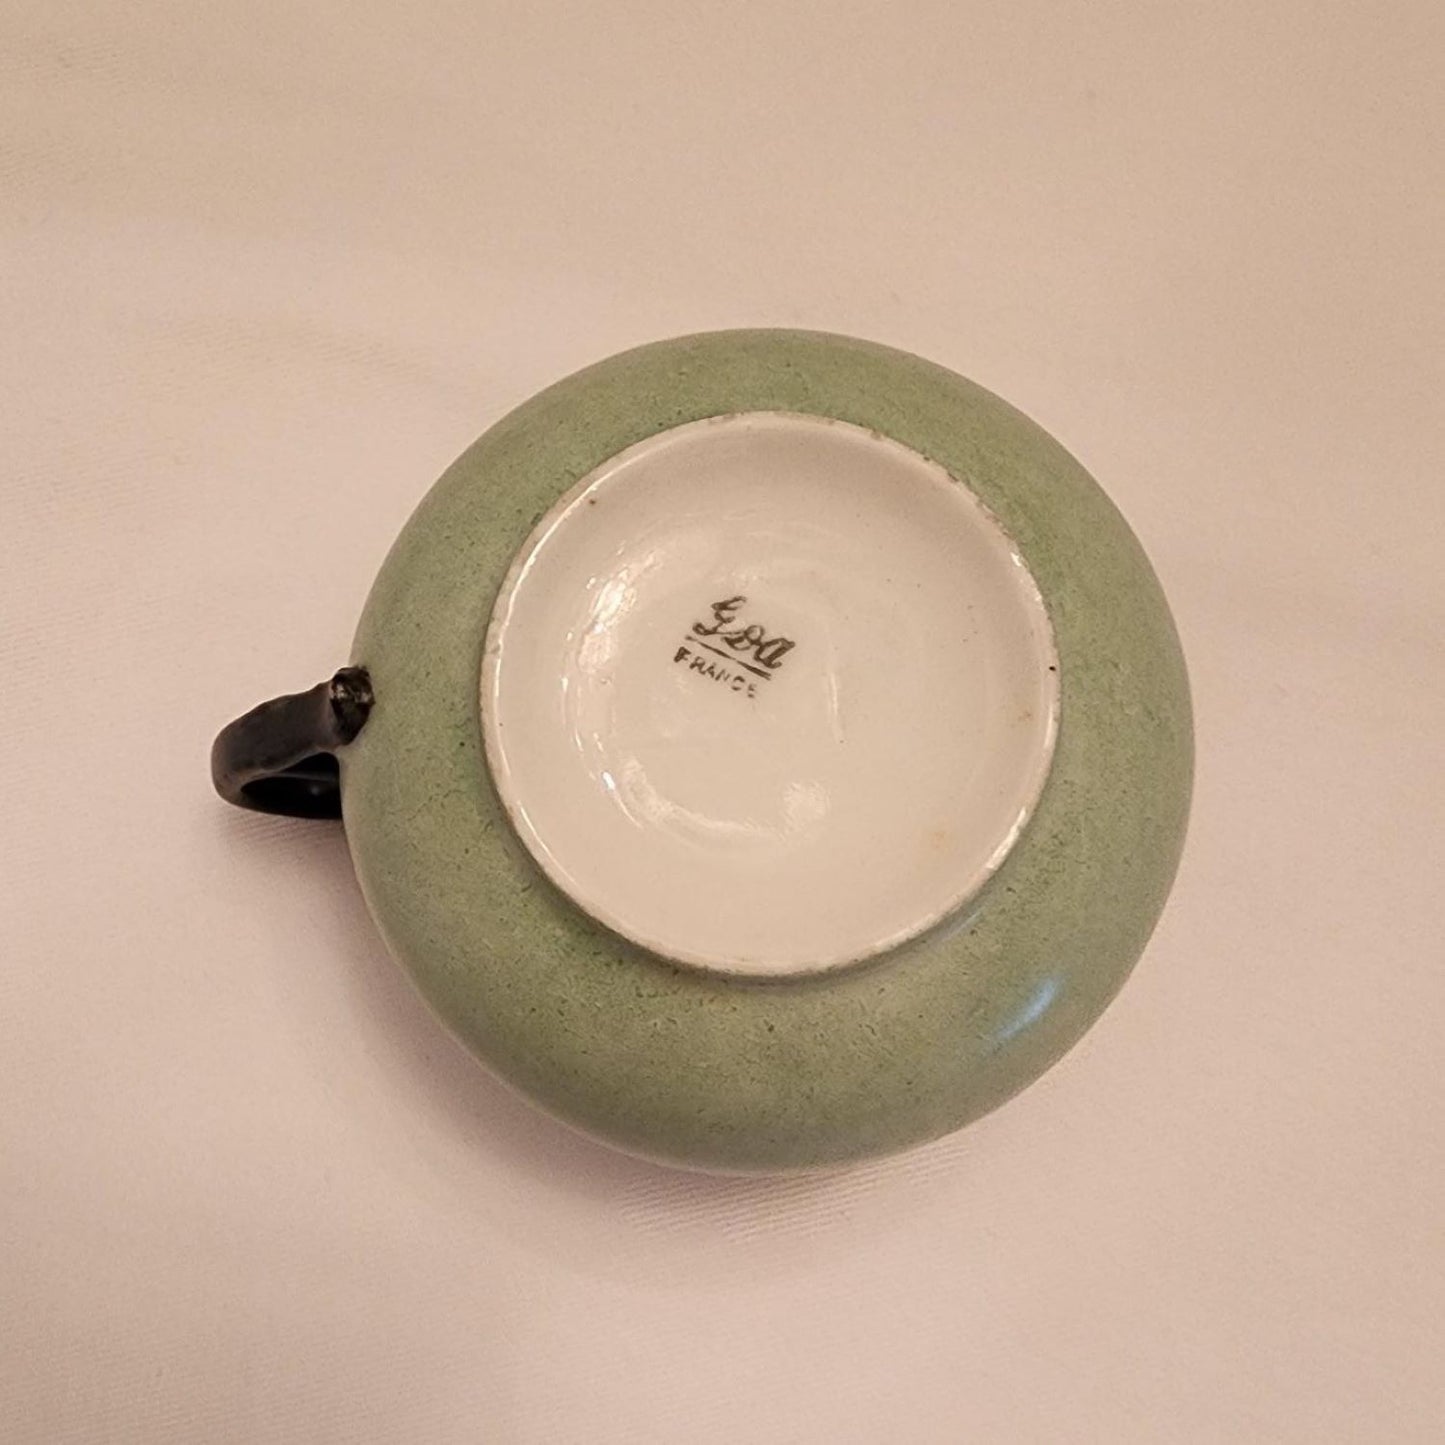 Green cup and saucer with bird design, perfect for enjoying a morning coffee in the garden.